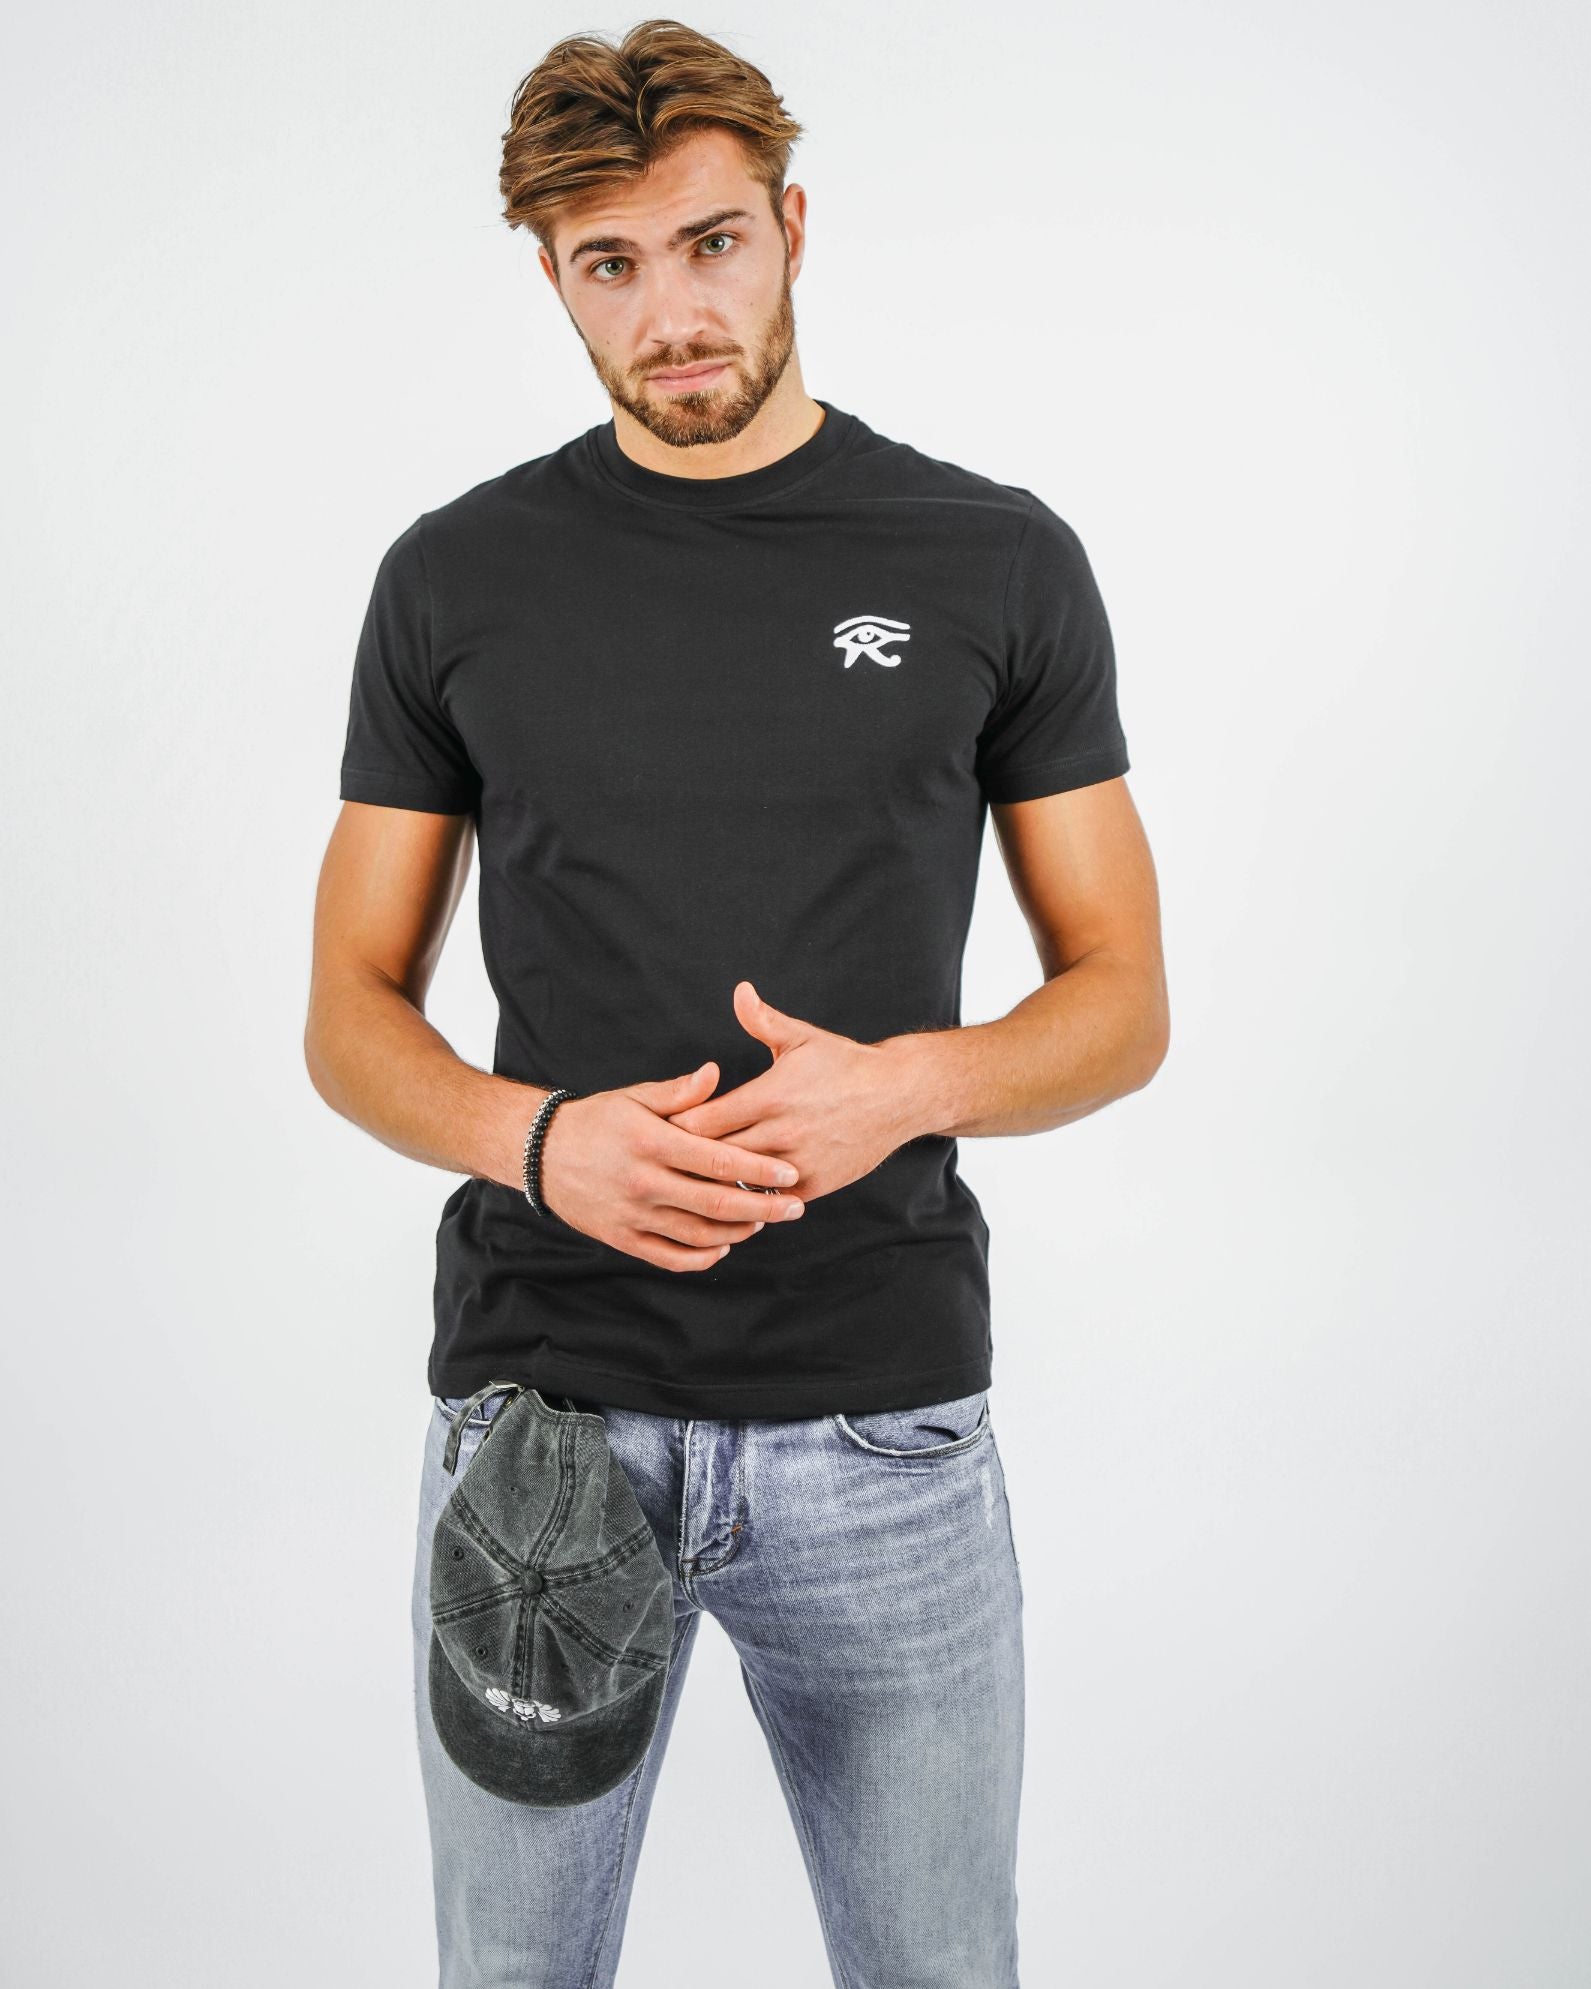 Black T-shirt Horus Eye Embroided on the models body - Slim Fit - Online Clothing - Dicci